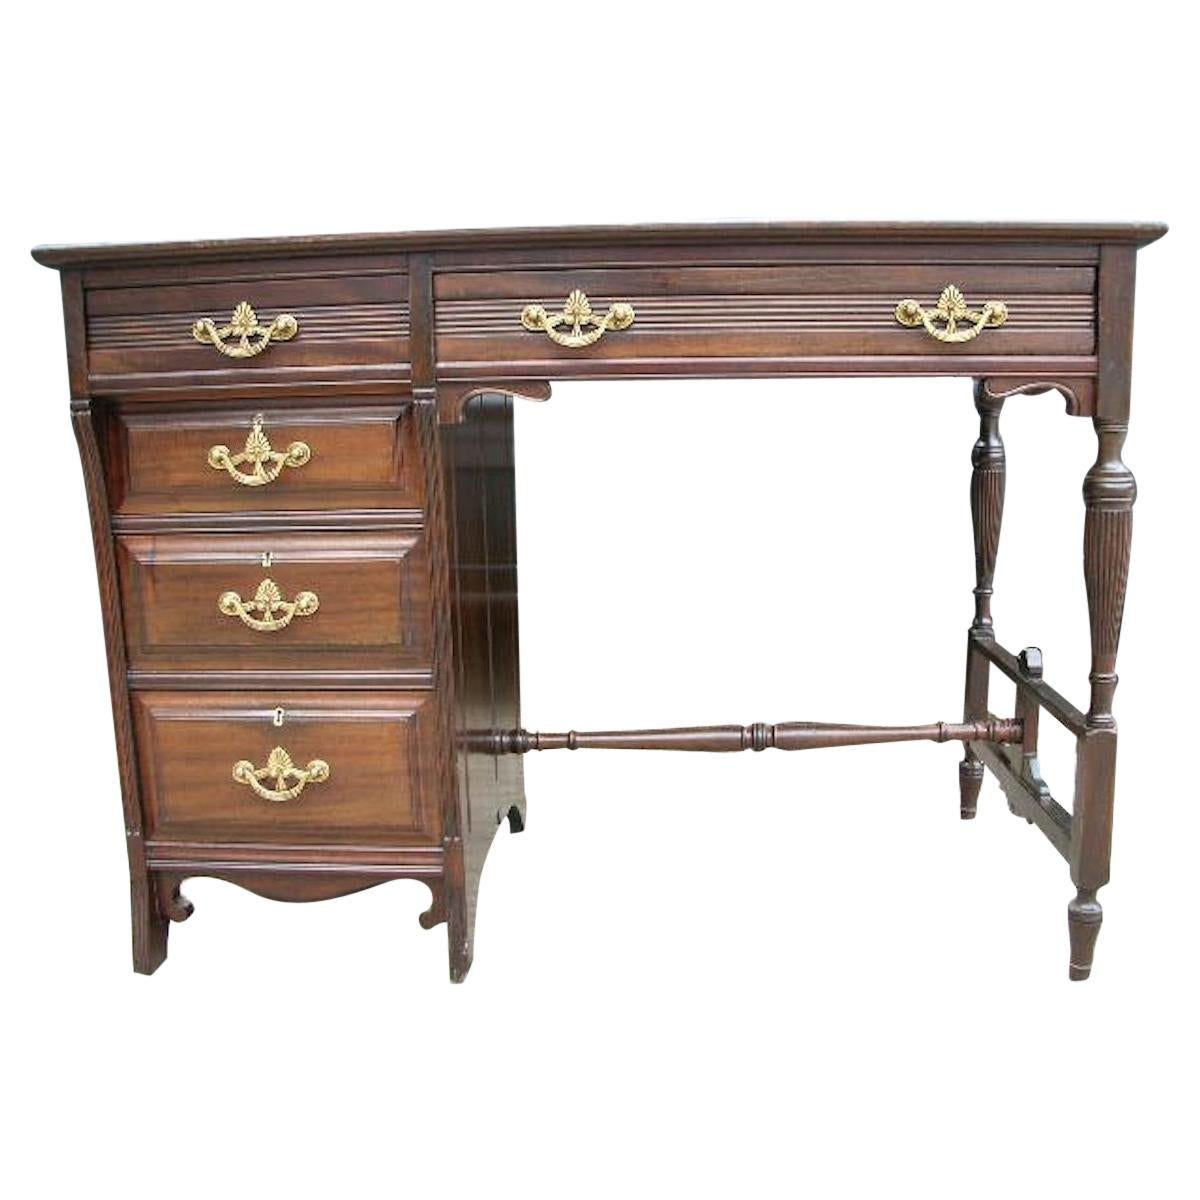 Lamb of Manchester, An Aesthetic Movement Walnut Writing Desk. For Sale